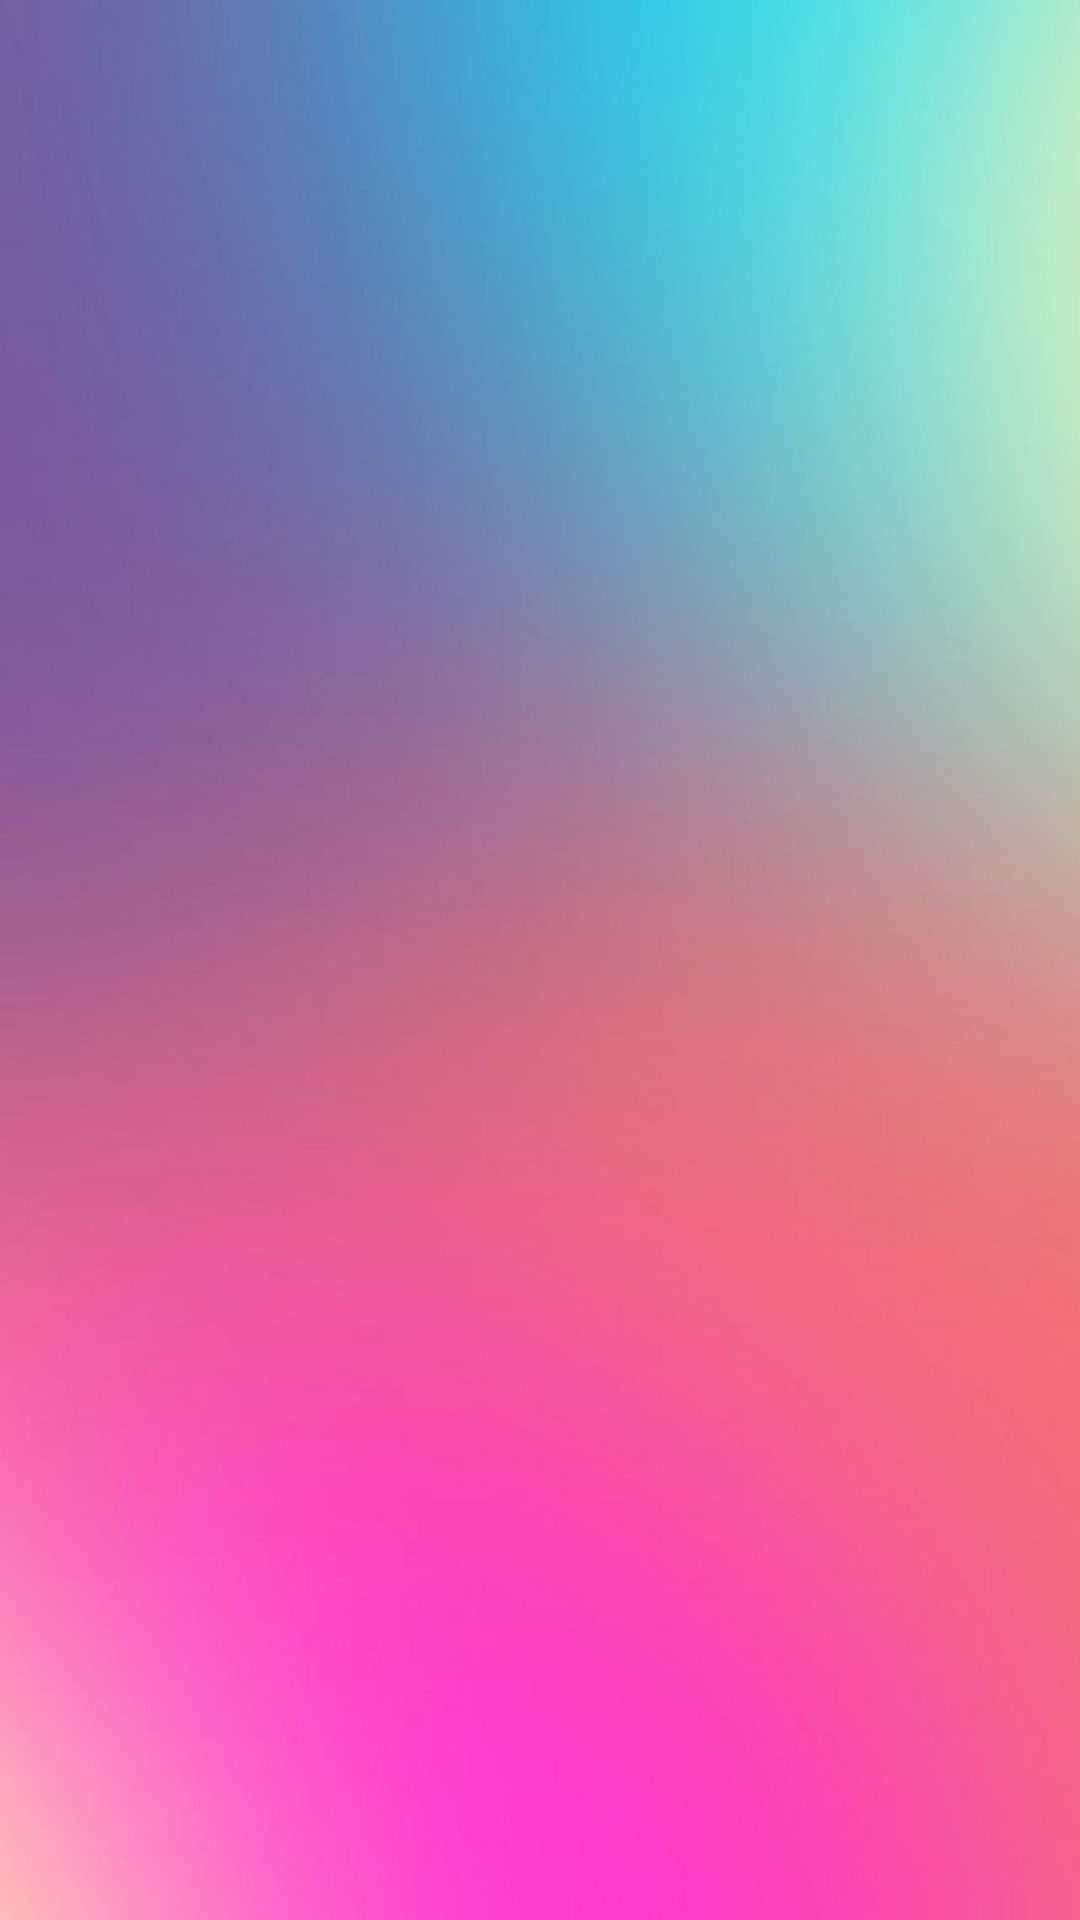 Gradient IPhone Wallpaper Design With High Resolution Wallpaper Design Wallpaper & Background Download